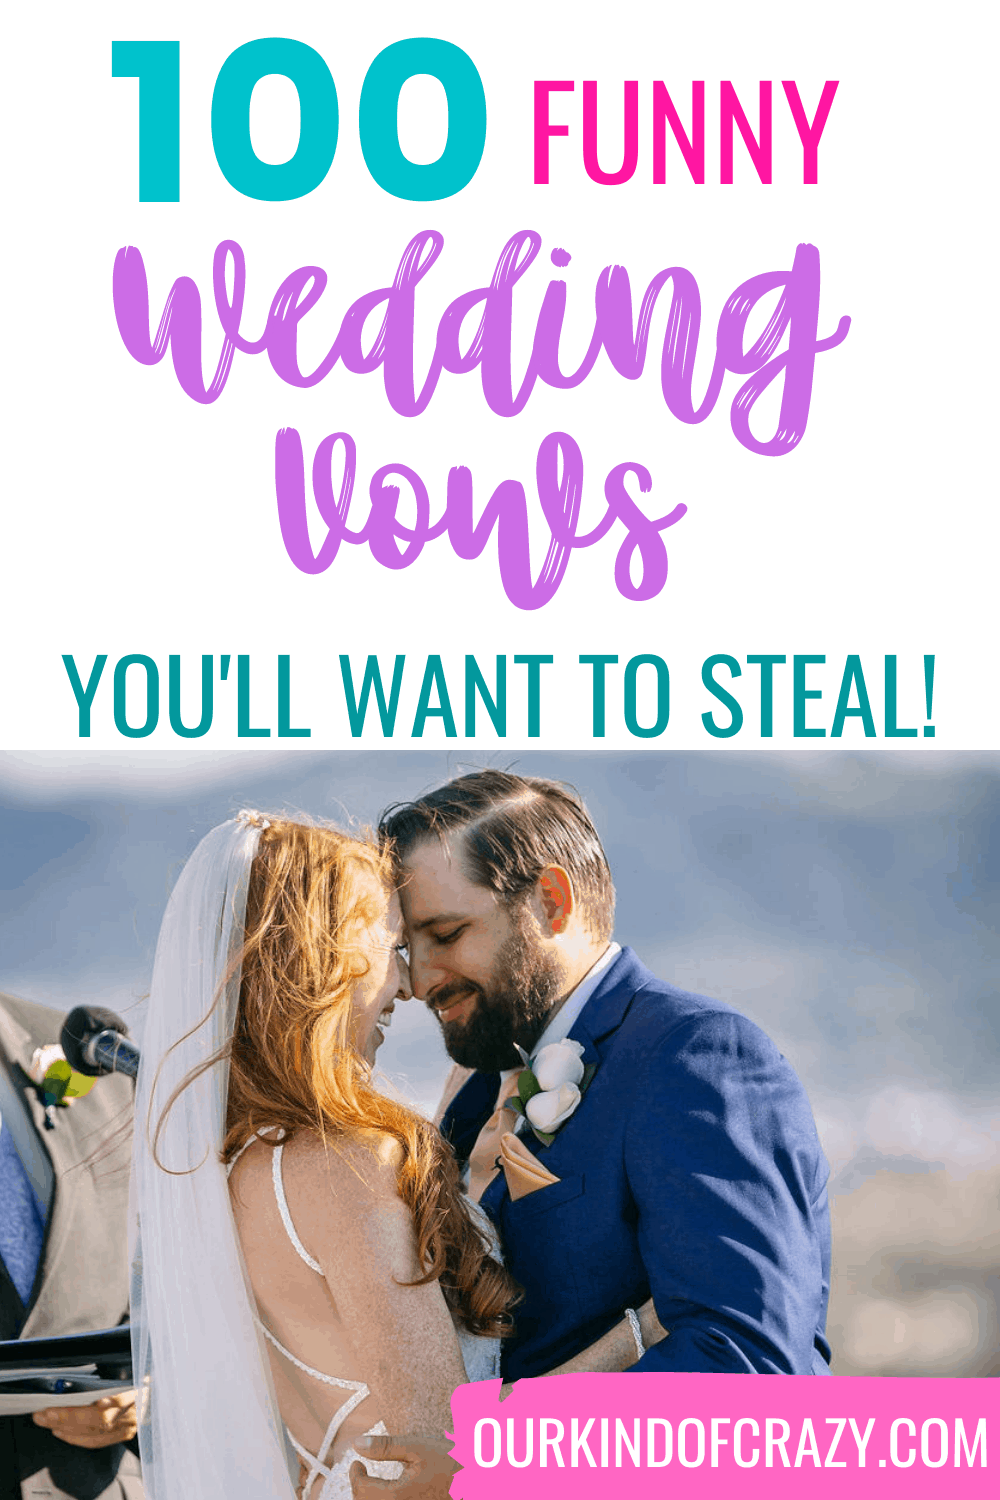 100 Funny Wedding Vows You Can Steal & Tips to Write Your Own